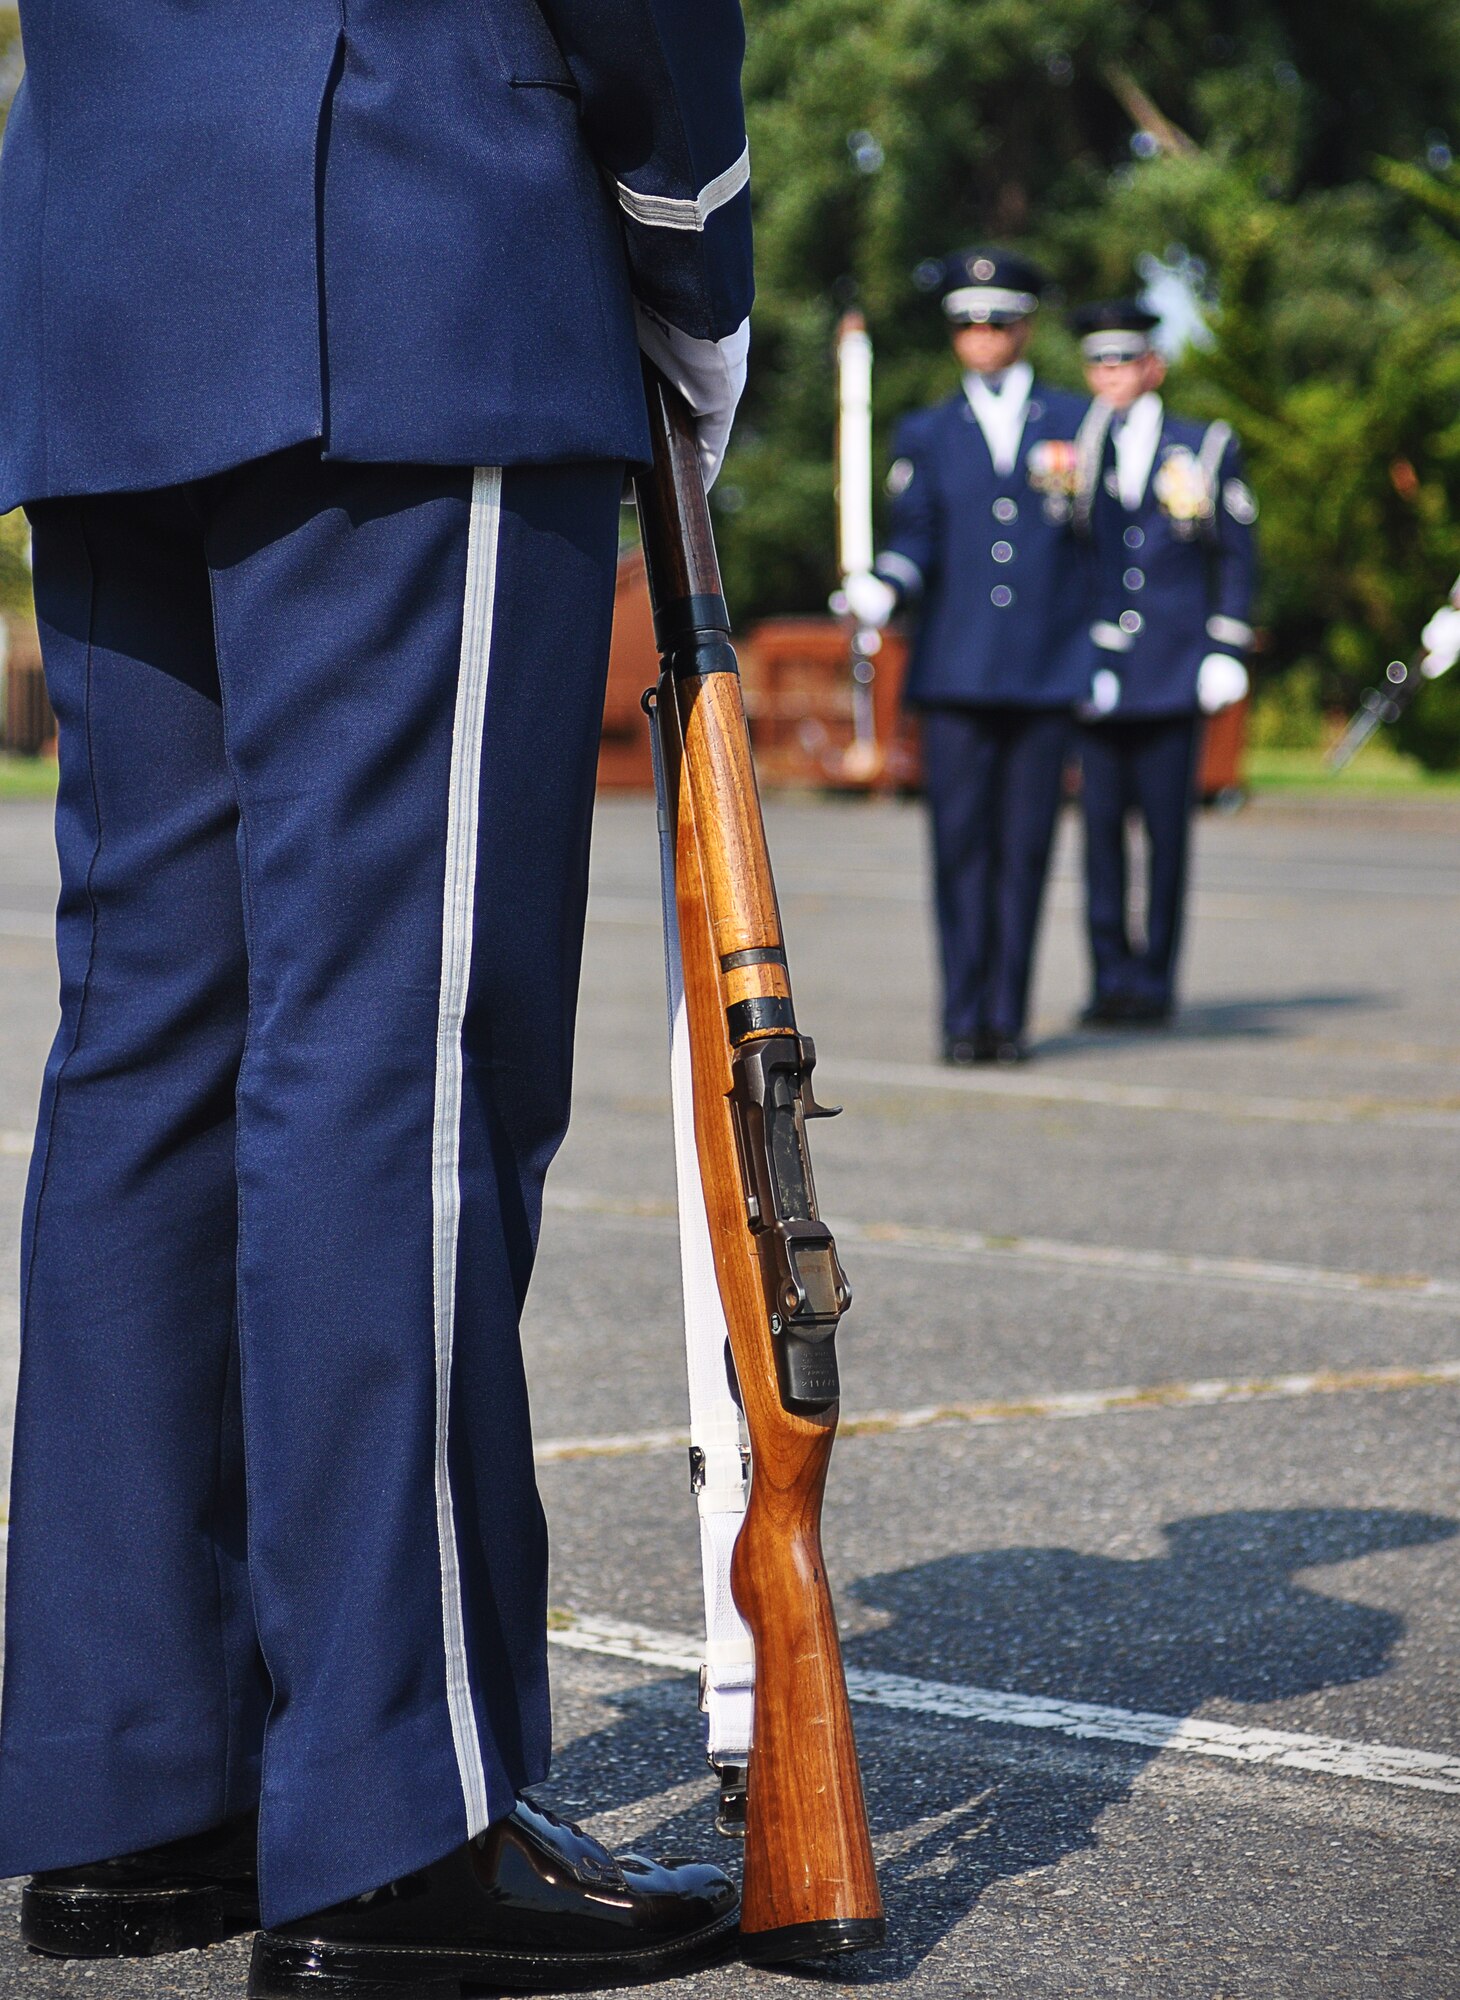 A member of the U.S. Air Force Honor Guard drill team stands with his M-1 Garand rifile at his side as his teammates perform in the background, Sept. 24, 2012 at Joint Base Lewis-McChord, Wash. The team stopped at JBLM on their tour around the country and performed many demonstrations around the area. (U.S. Air Force photo/Staff Sgt. Sean Tobin)